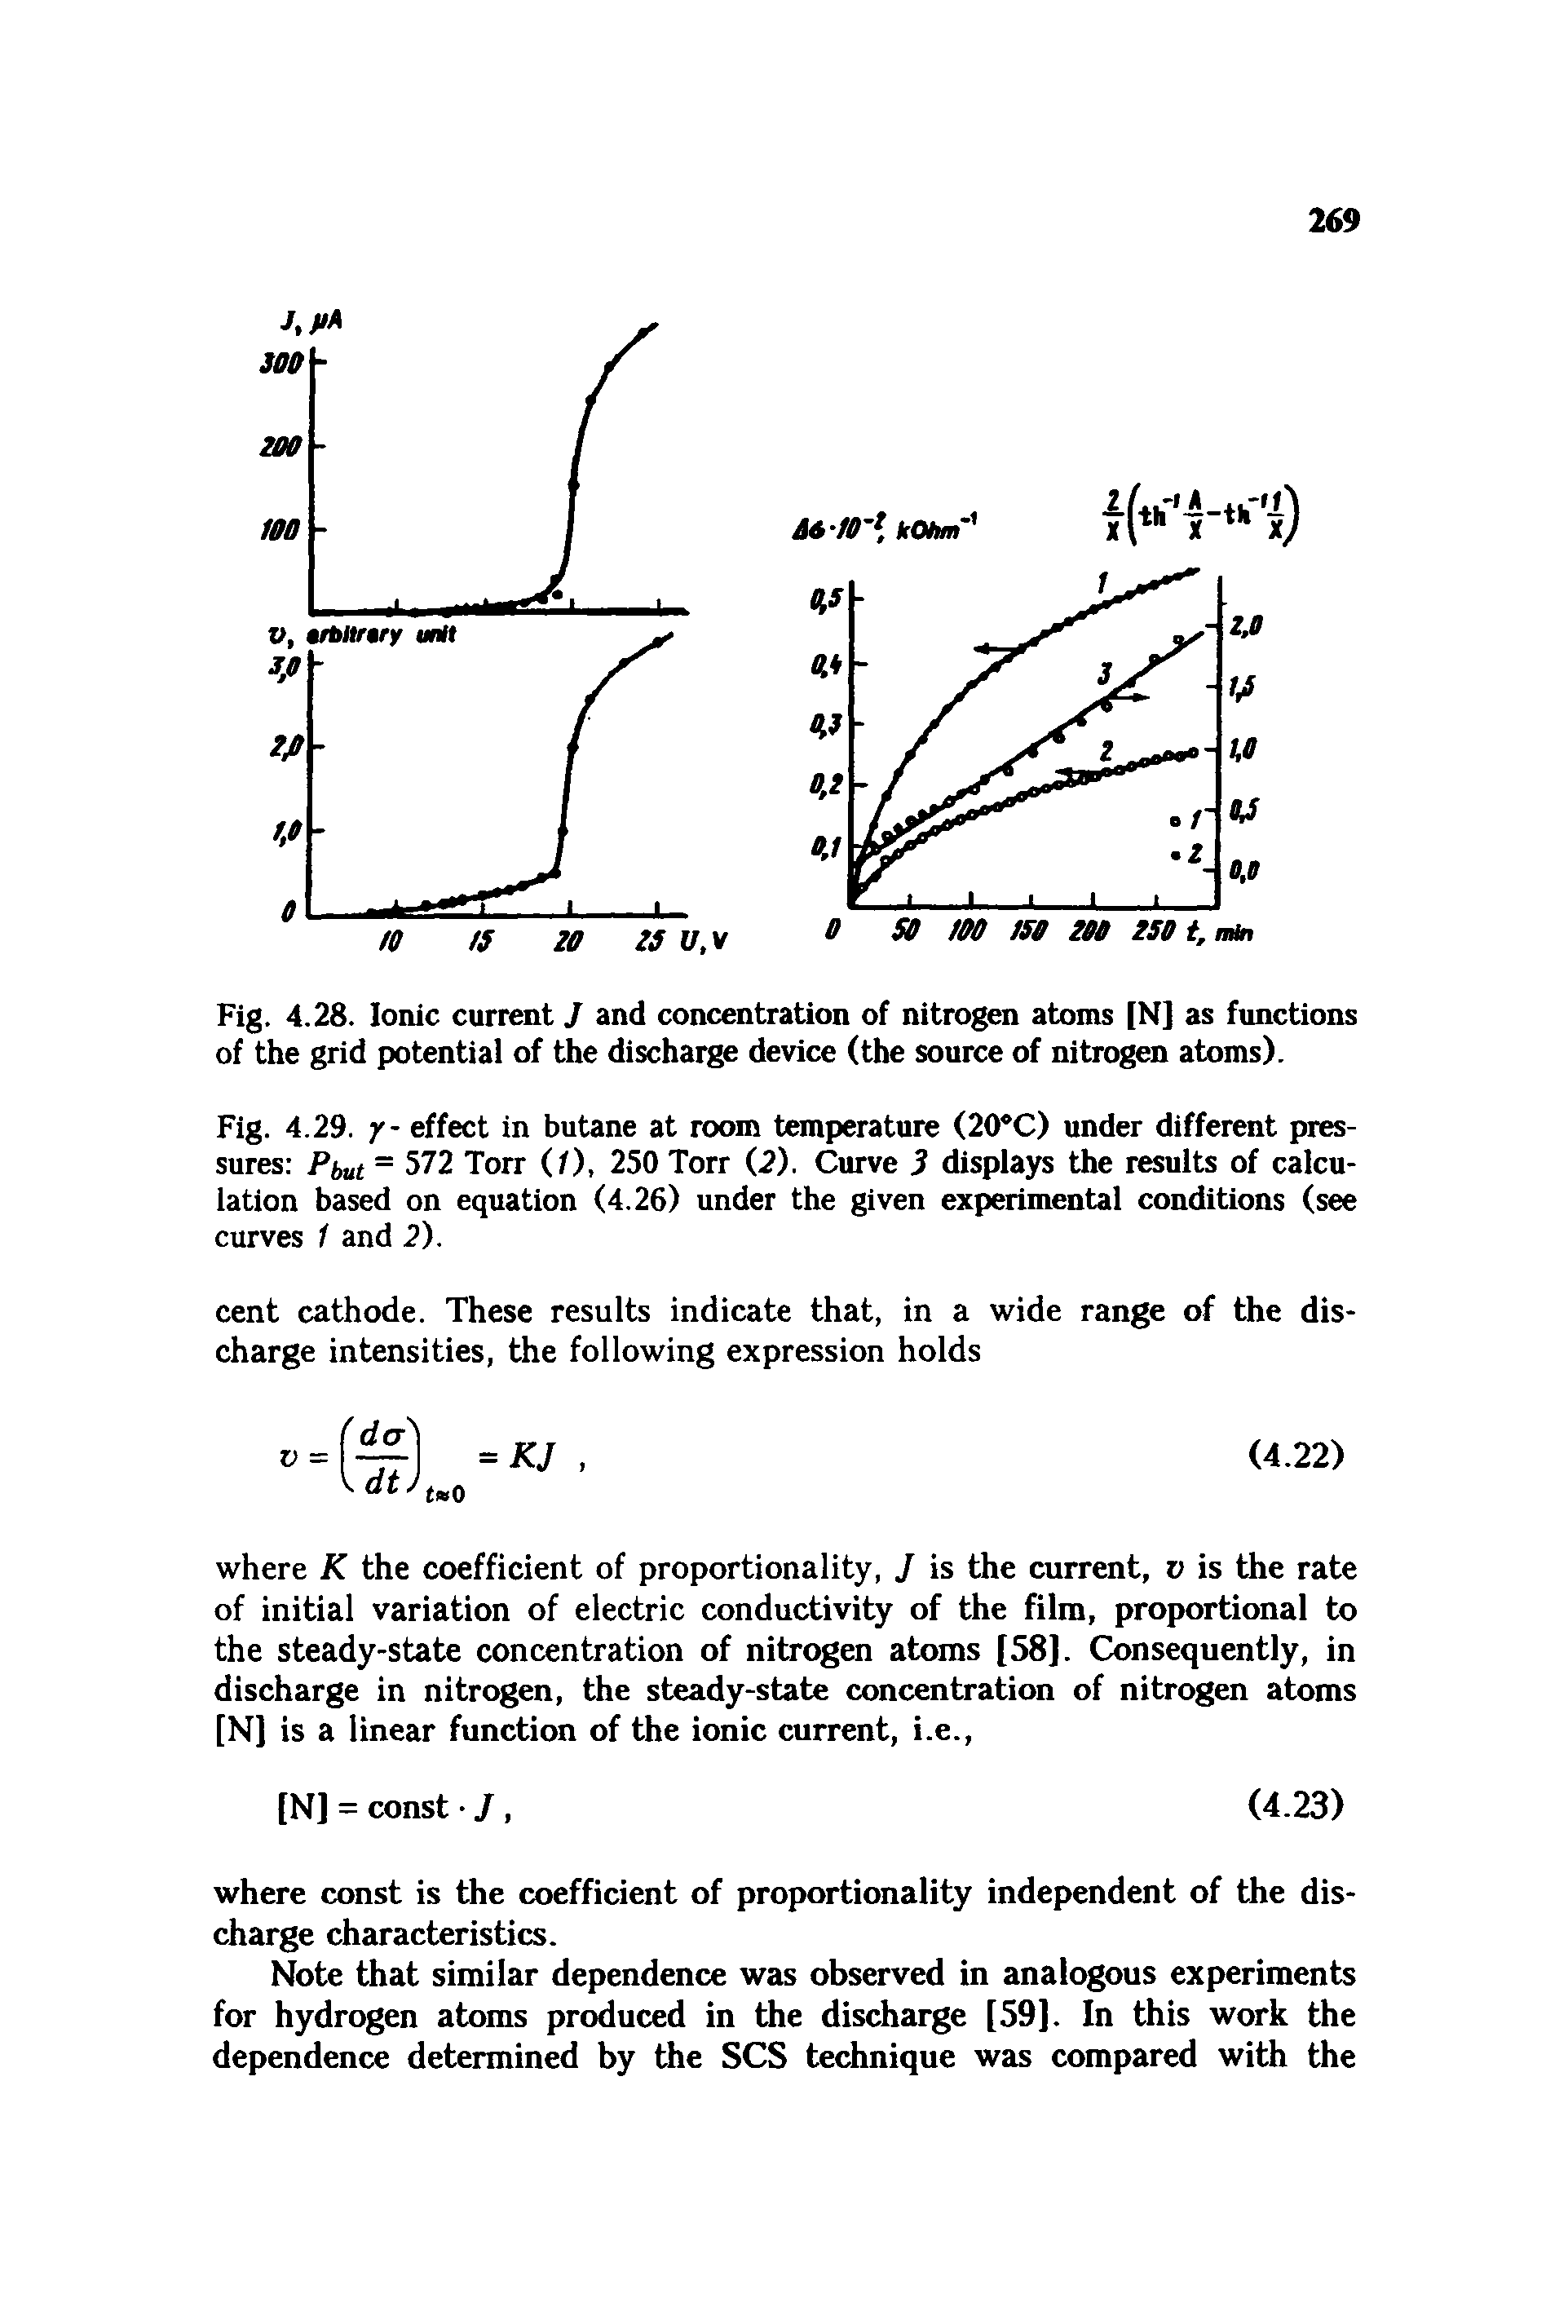 Fig. 4.28. Ionic current / and concentration of nitrogen atoms [N] as functions of the grid potential of the discharge device (the source of nitrogen atoms).